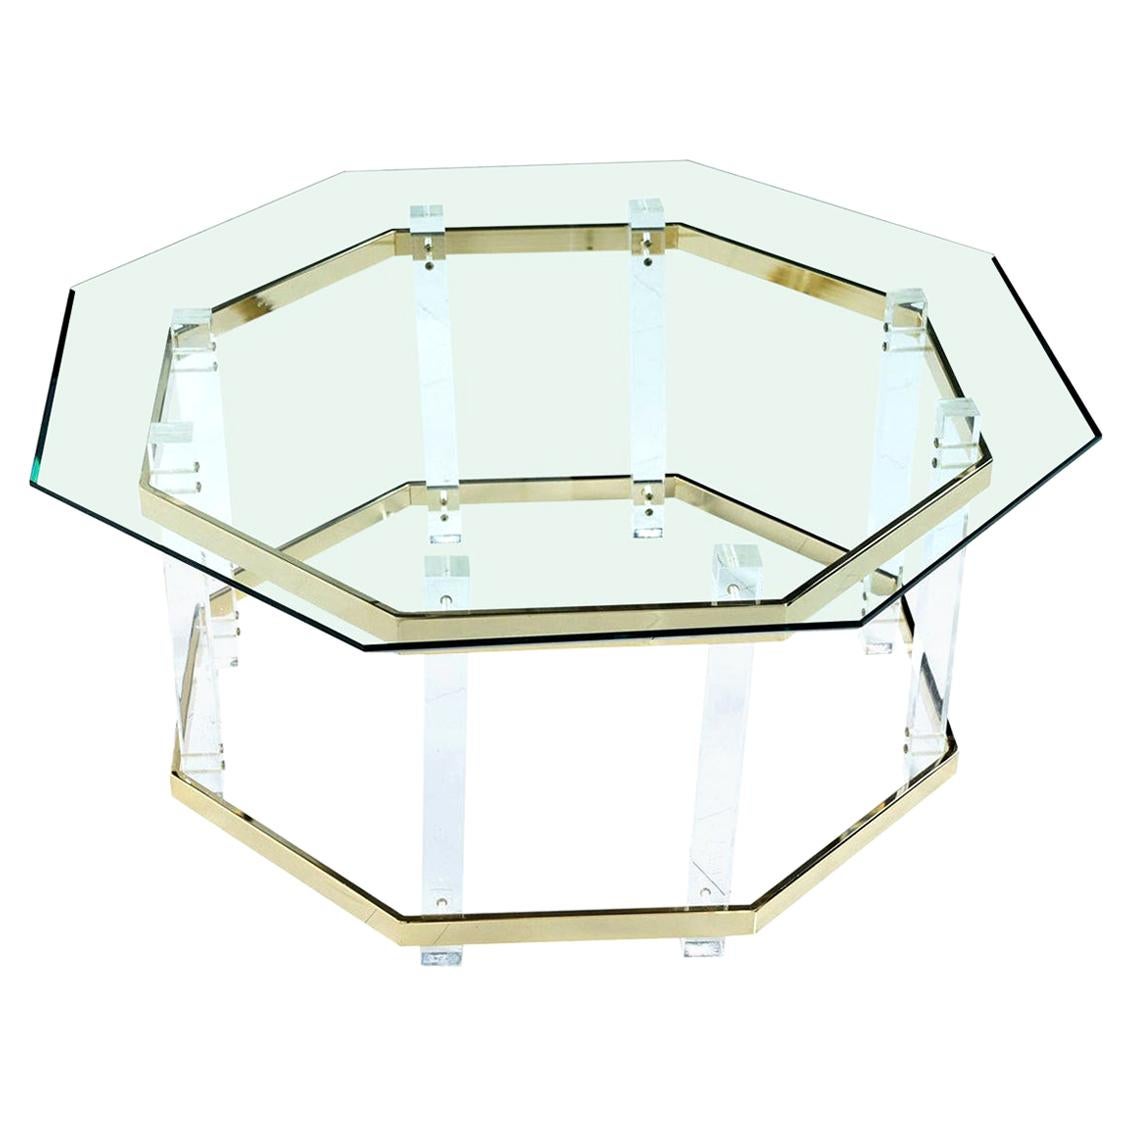 Vintage 1980s Charles Hollis Jones style Lucite and brass coffee table with beveled hexagon glass top. The geometric beveled glass top creates a silhouette mimicking the dynamic angles and form of the table base. Vertical acrylic architectural